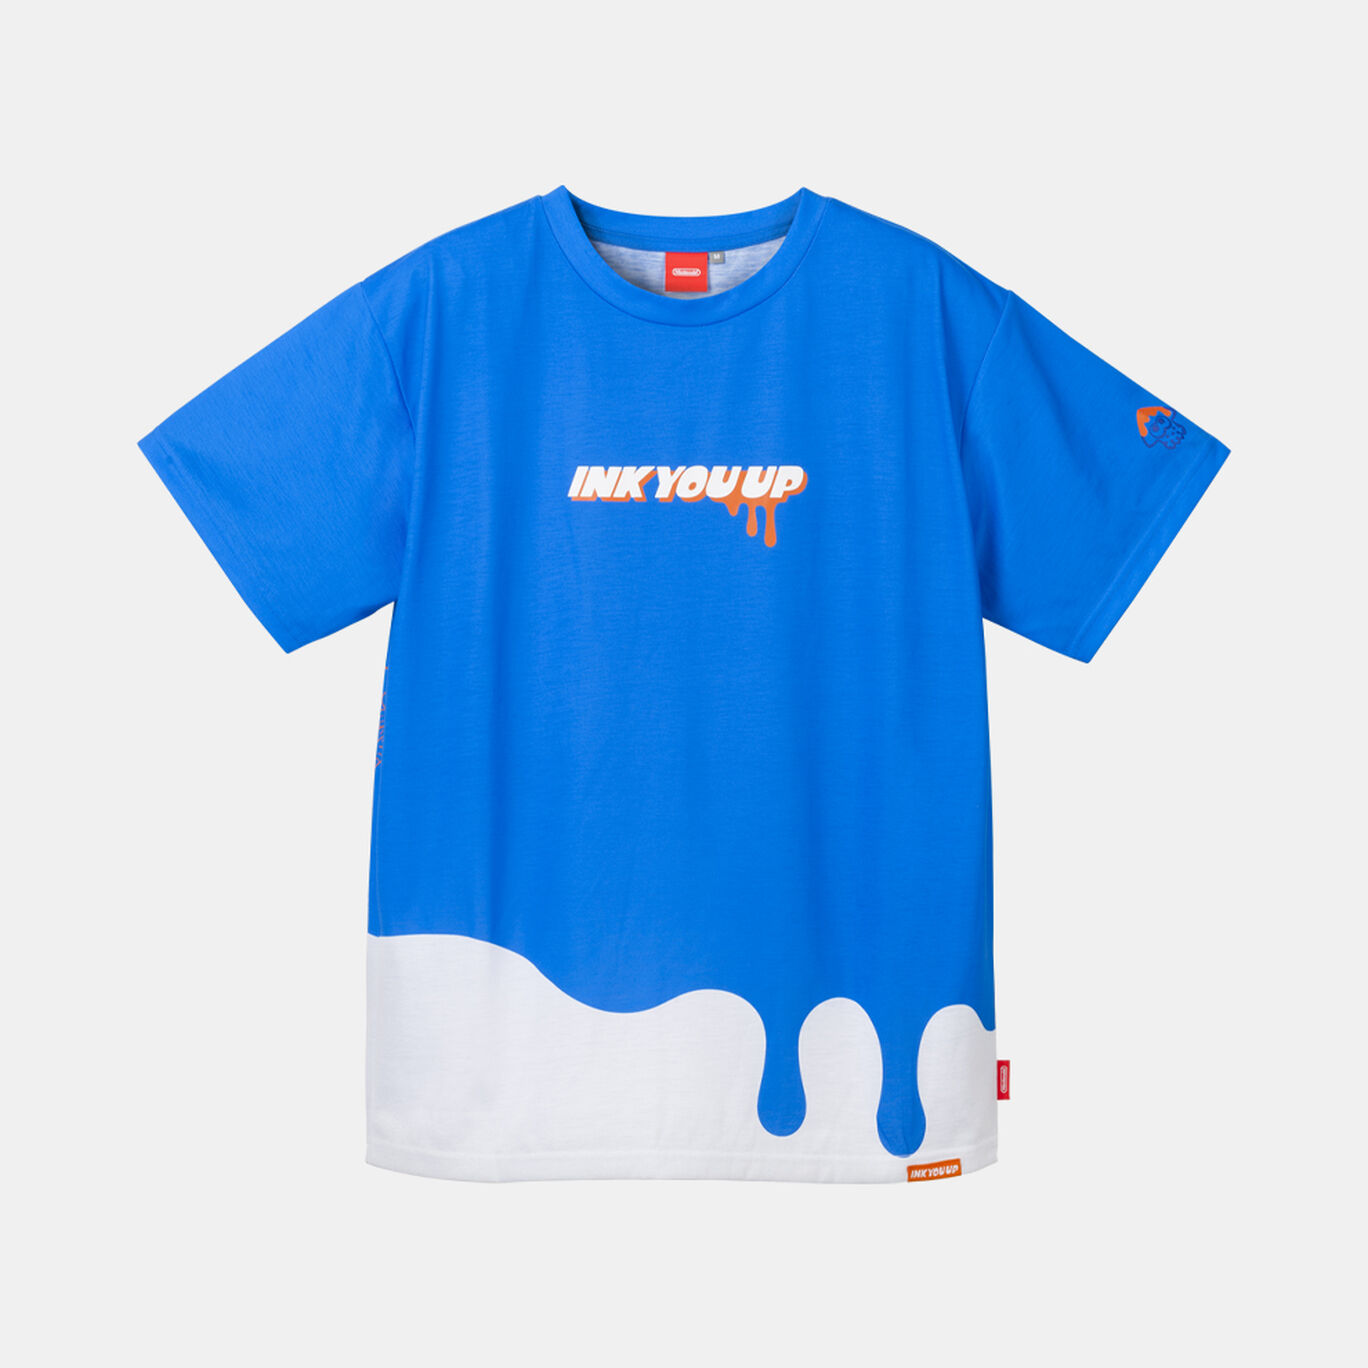 Tシャツ A S INK YOU UP【Nintendo TOKYO取り扱い商品】